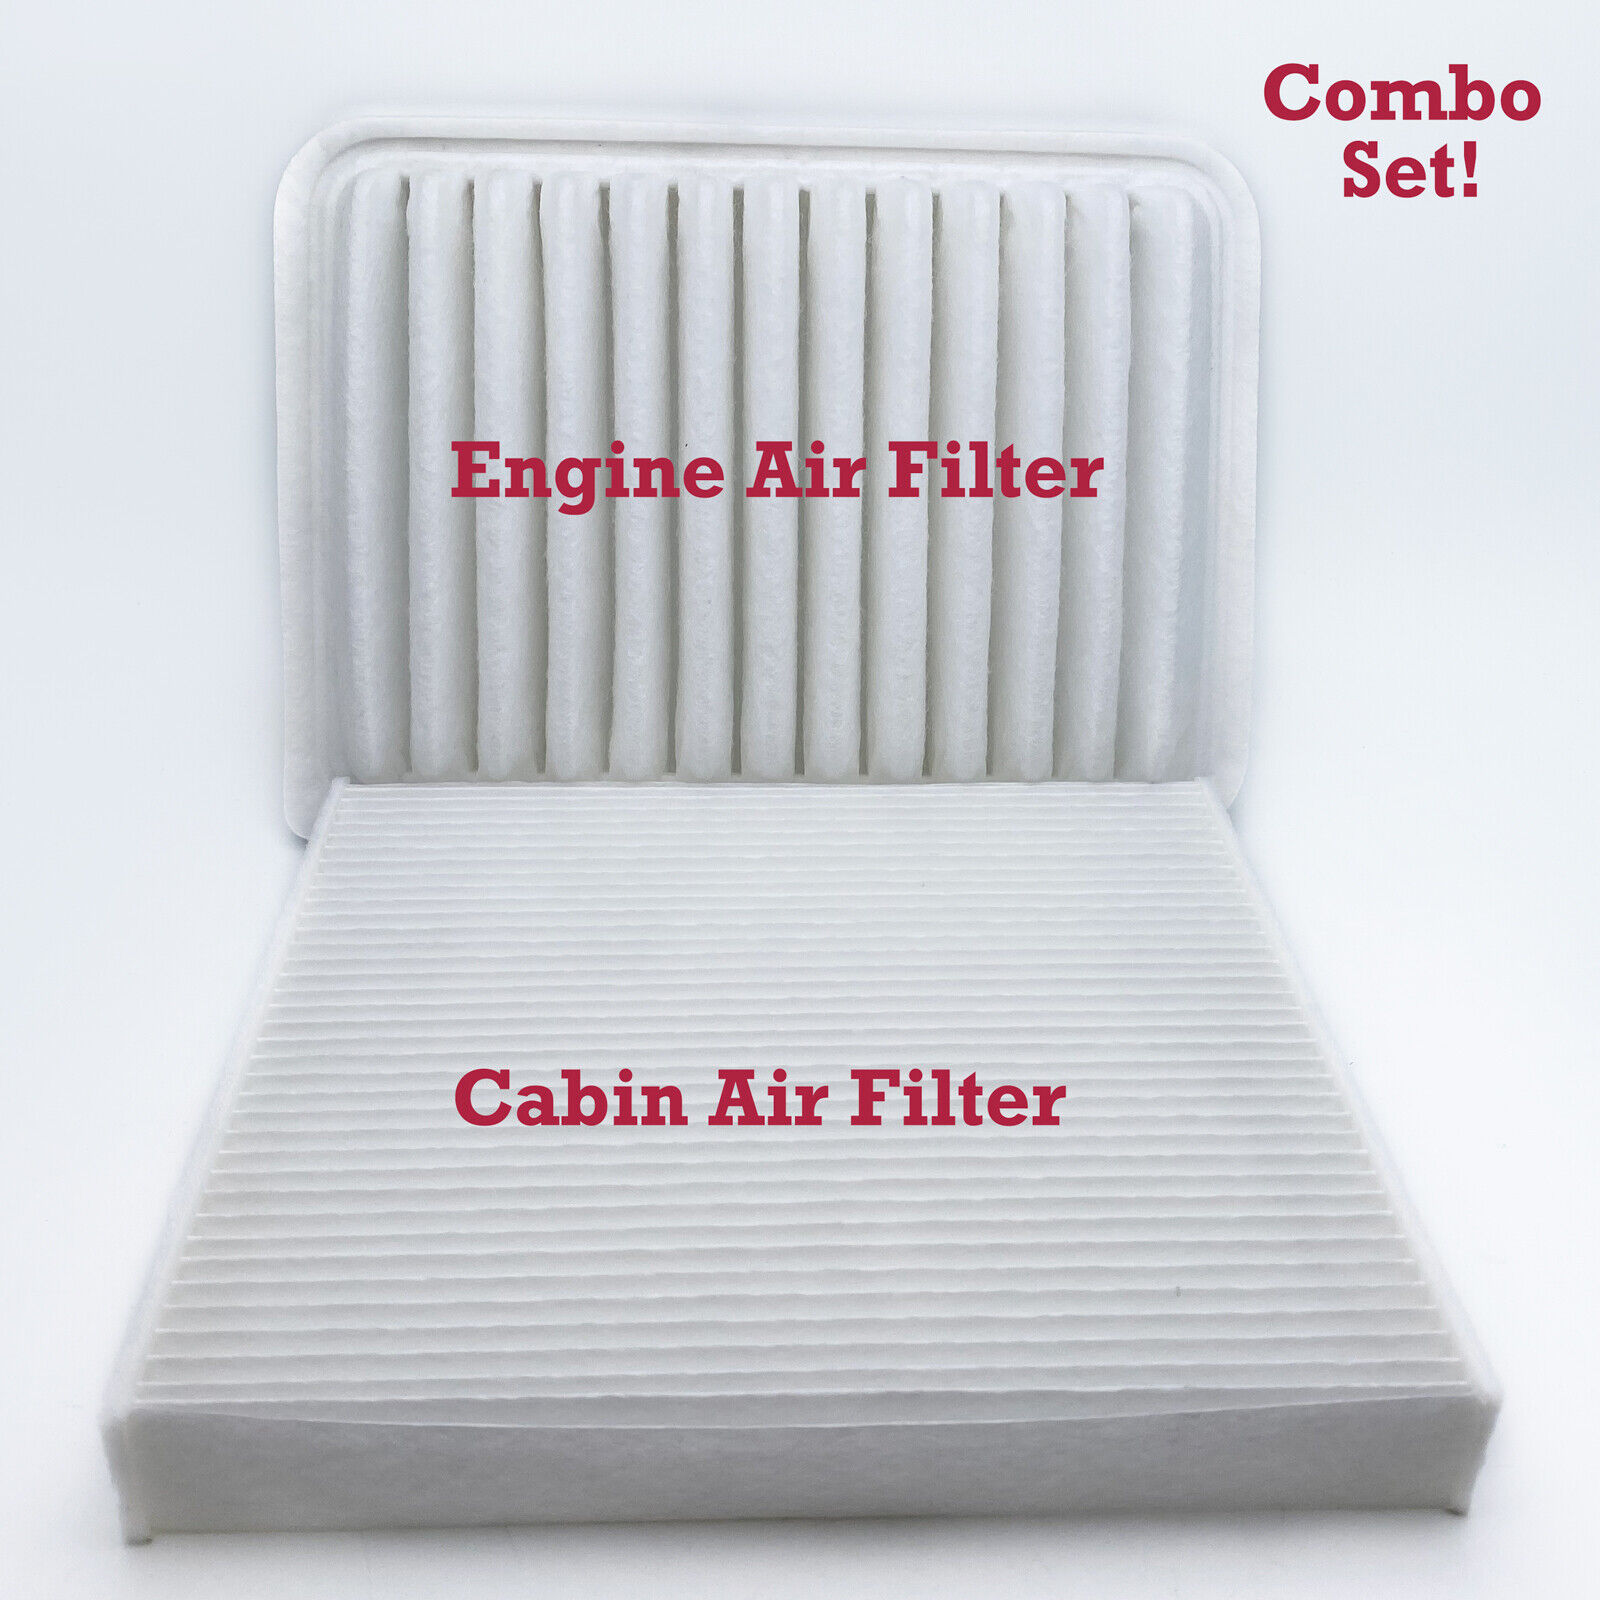 Engine & Cabin Air Filter Combo For Scion xD(08-14) iM(16), 2006-18 Toyota Yaris